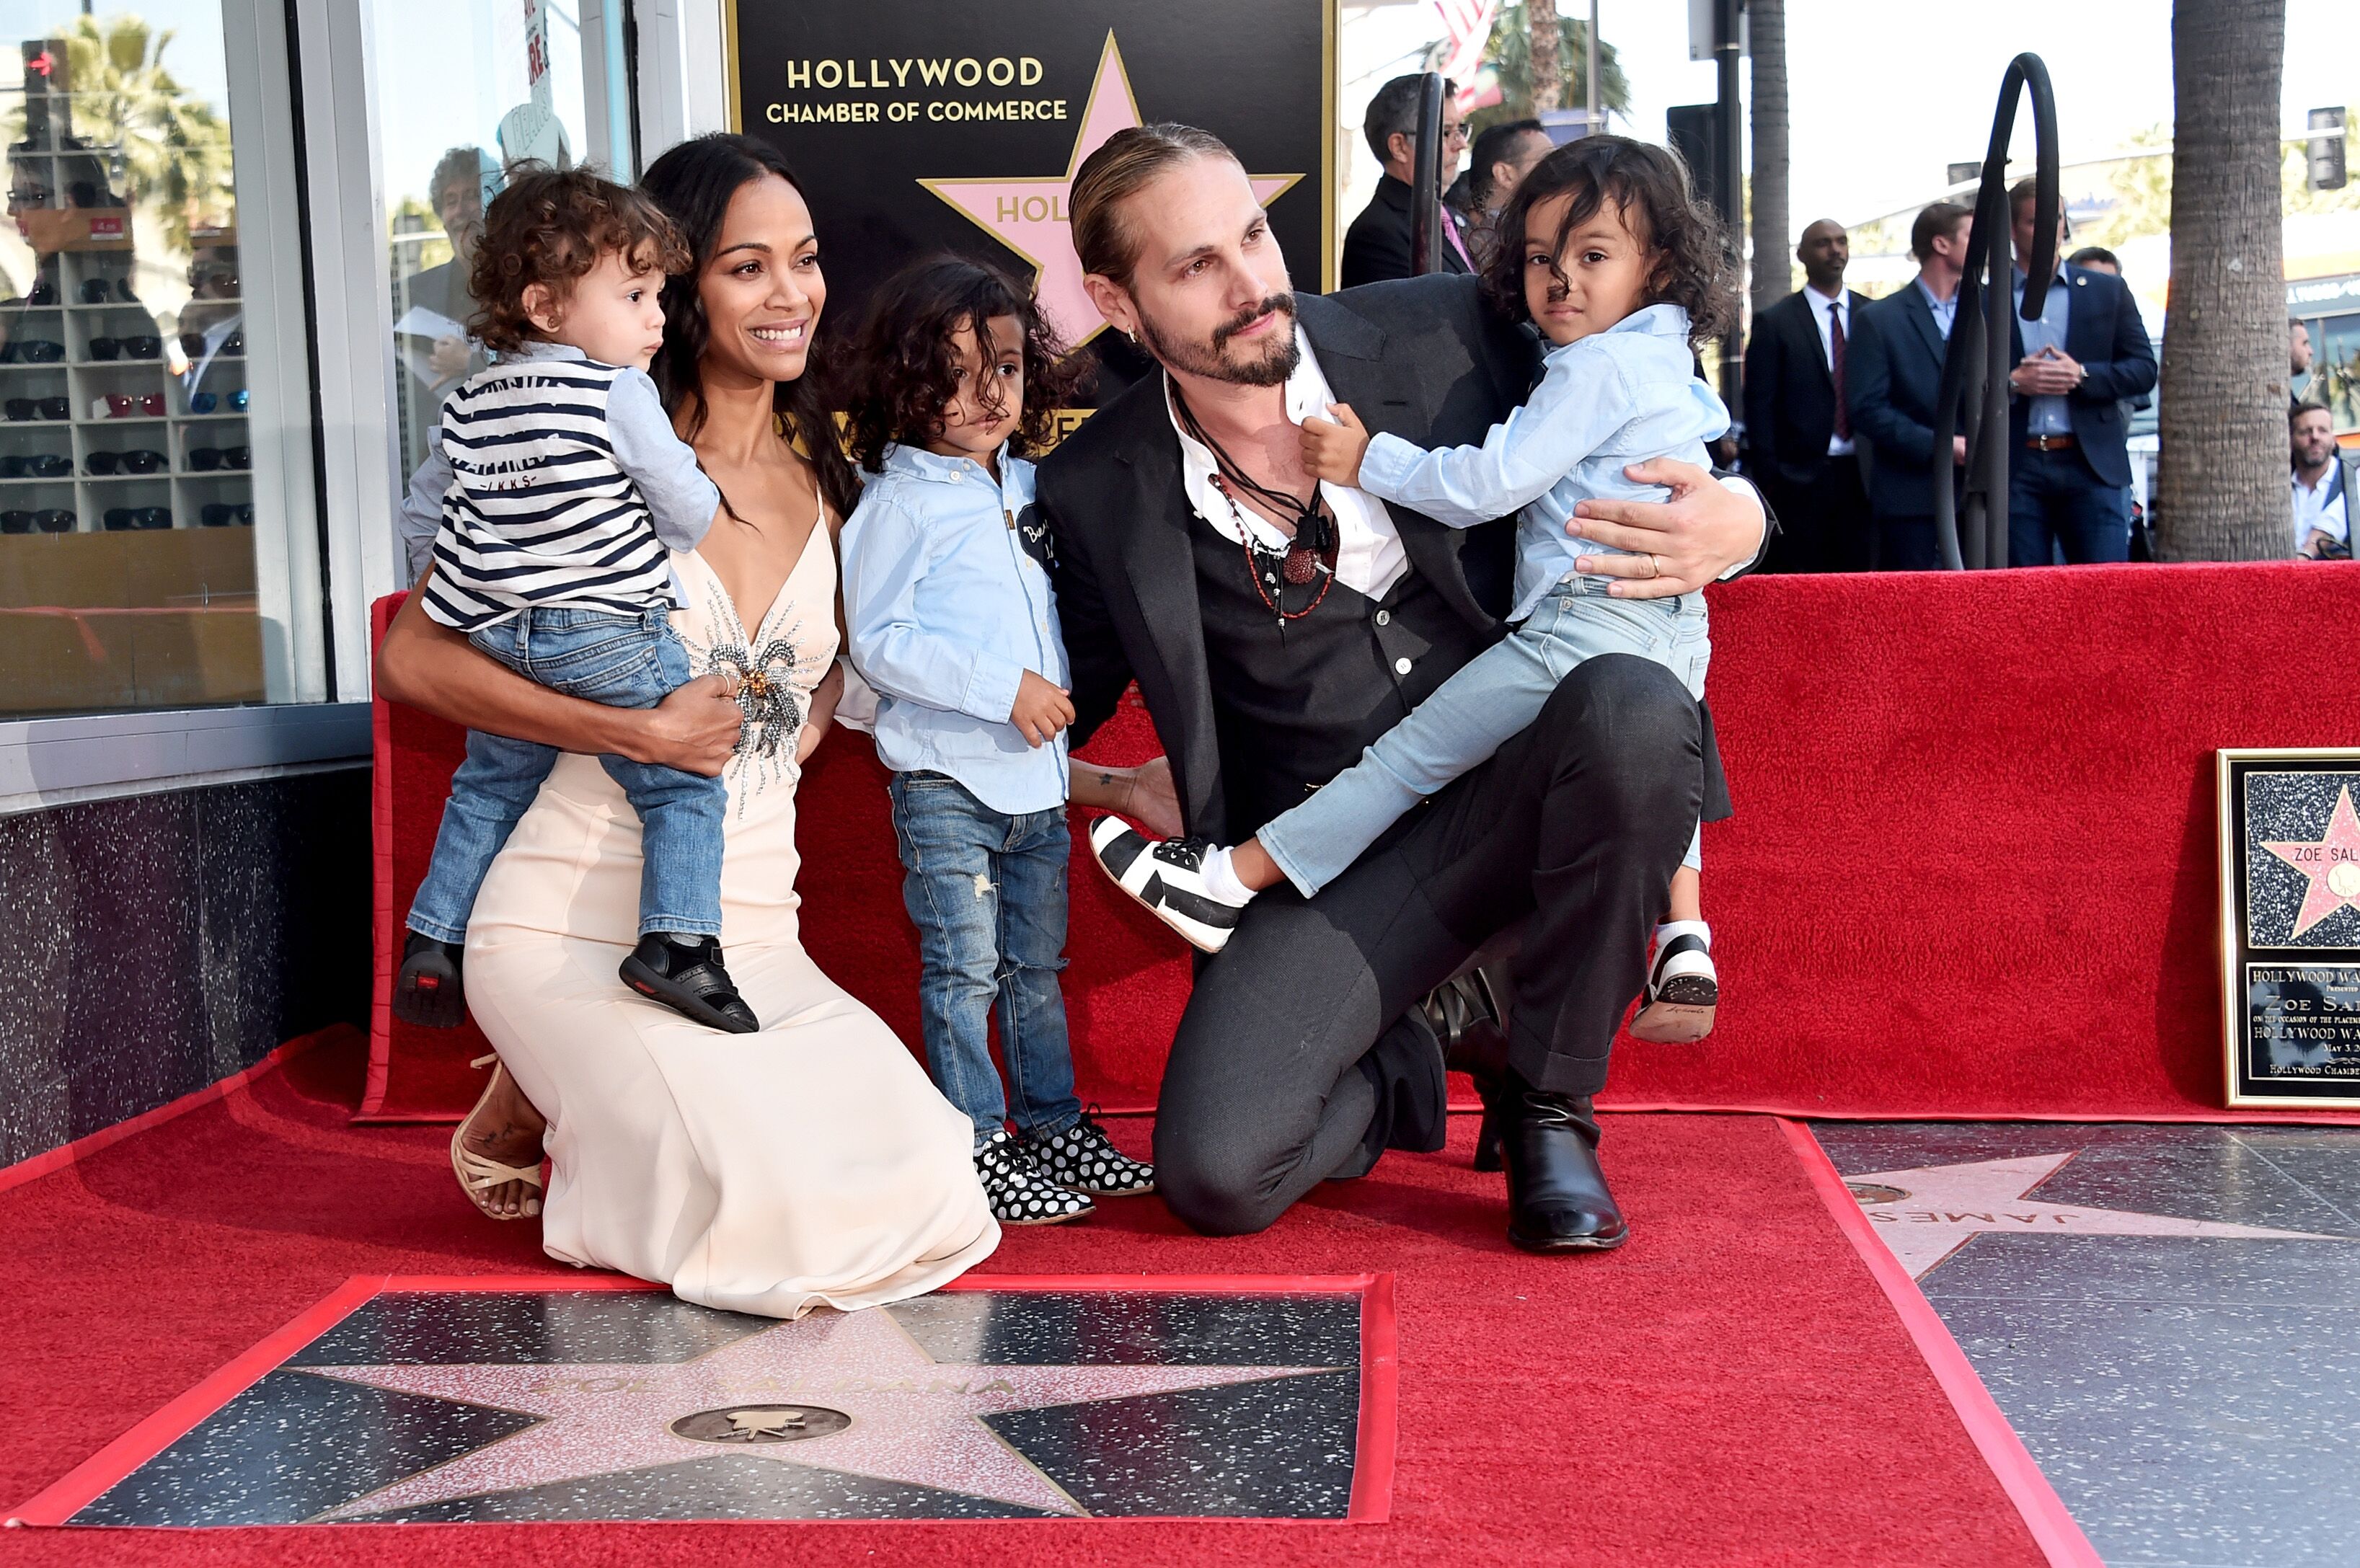 Honoree Zoe Saldana, Marco Perego, and children at the Zoe Saldana Walk Of Fame Star Ceremony in Hollywood, California | Photo: Getty Images